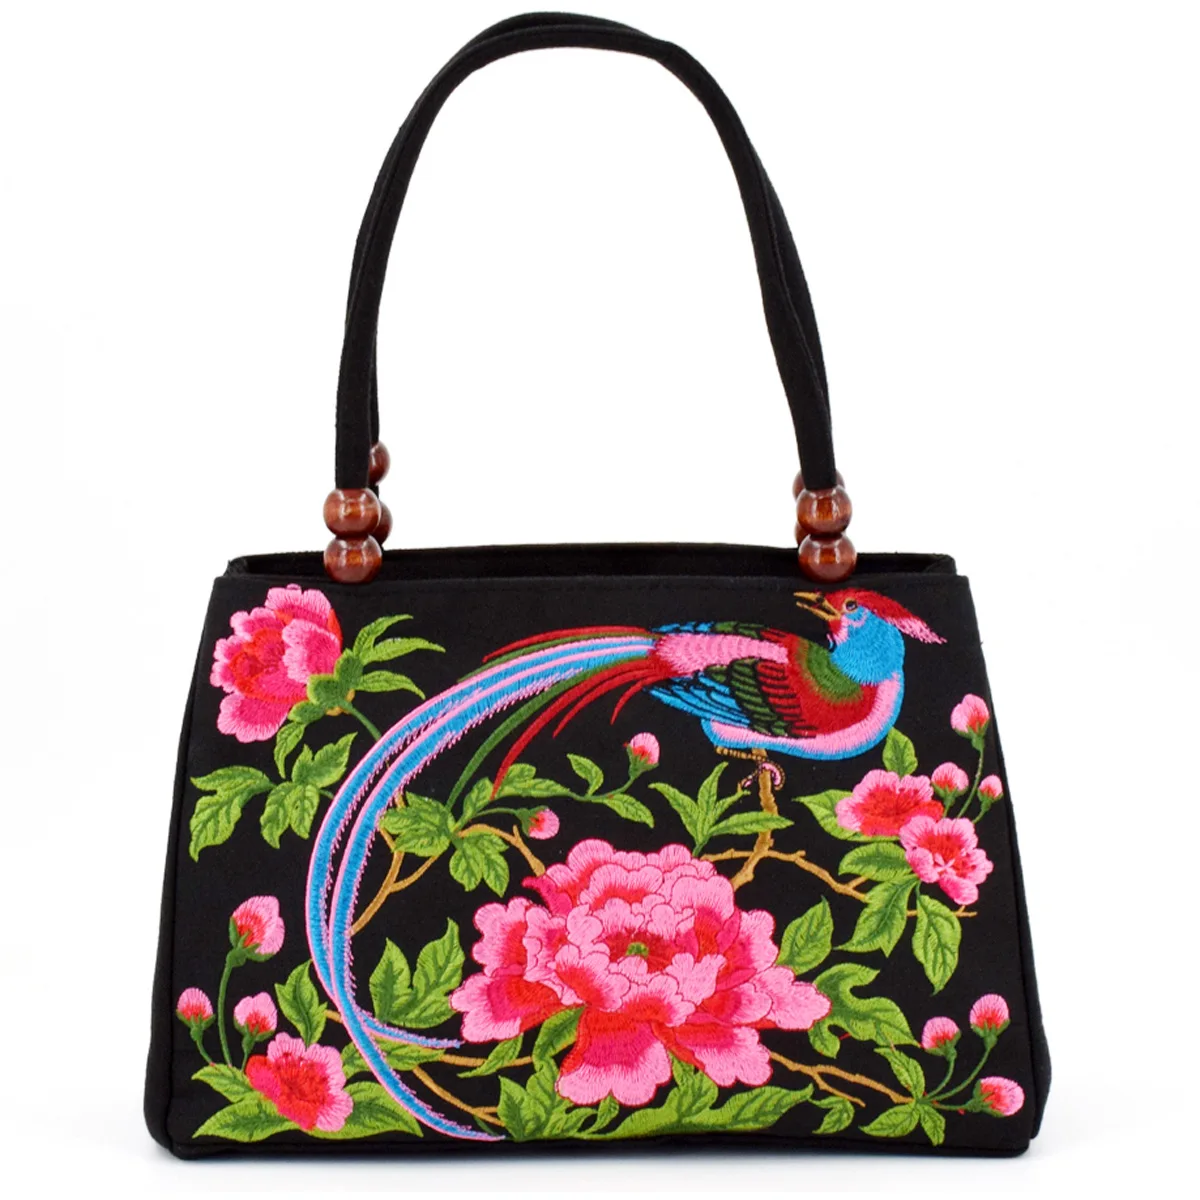 

Ethnic Style Embroidered Tote Bag Double-Layered Canvas Zipper Handbag Retro Flower Embroidery Clutch